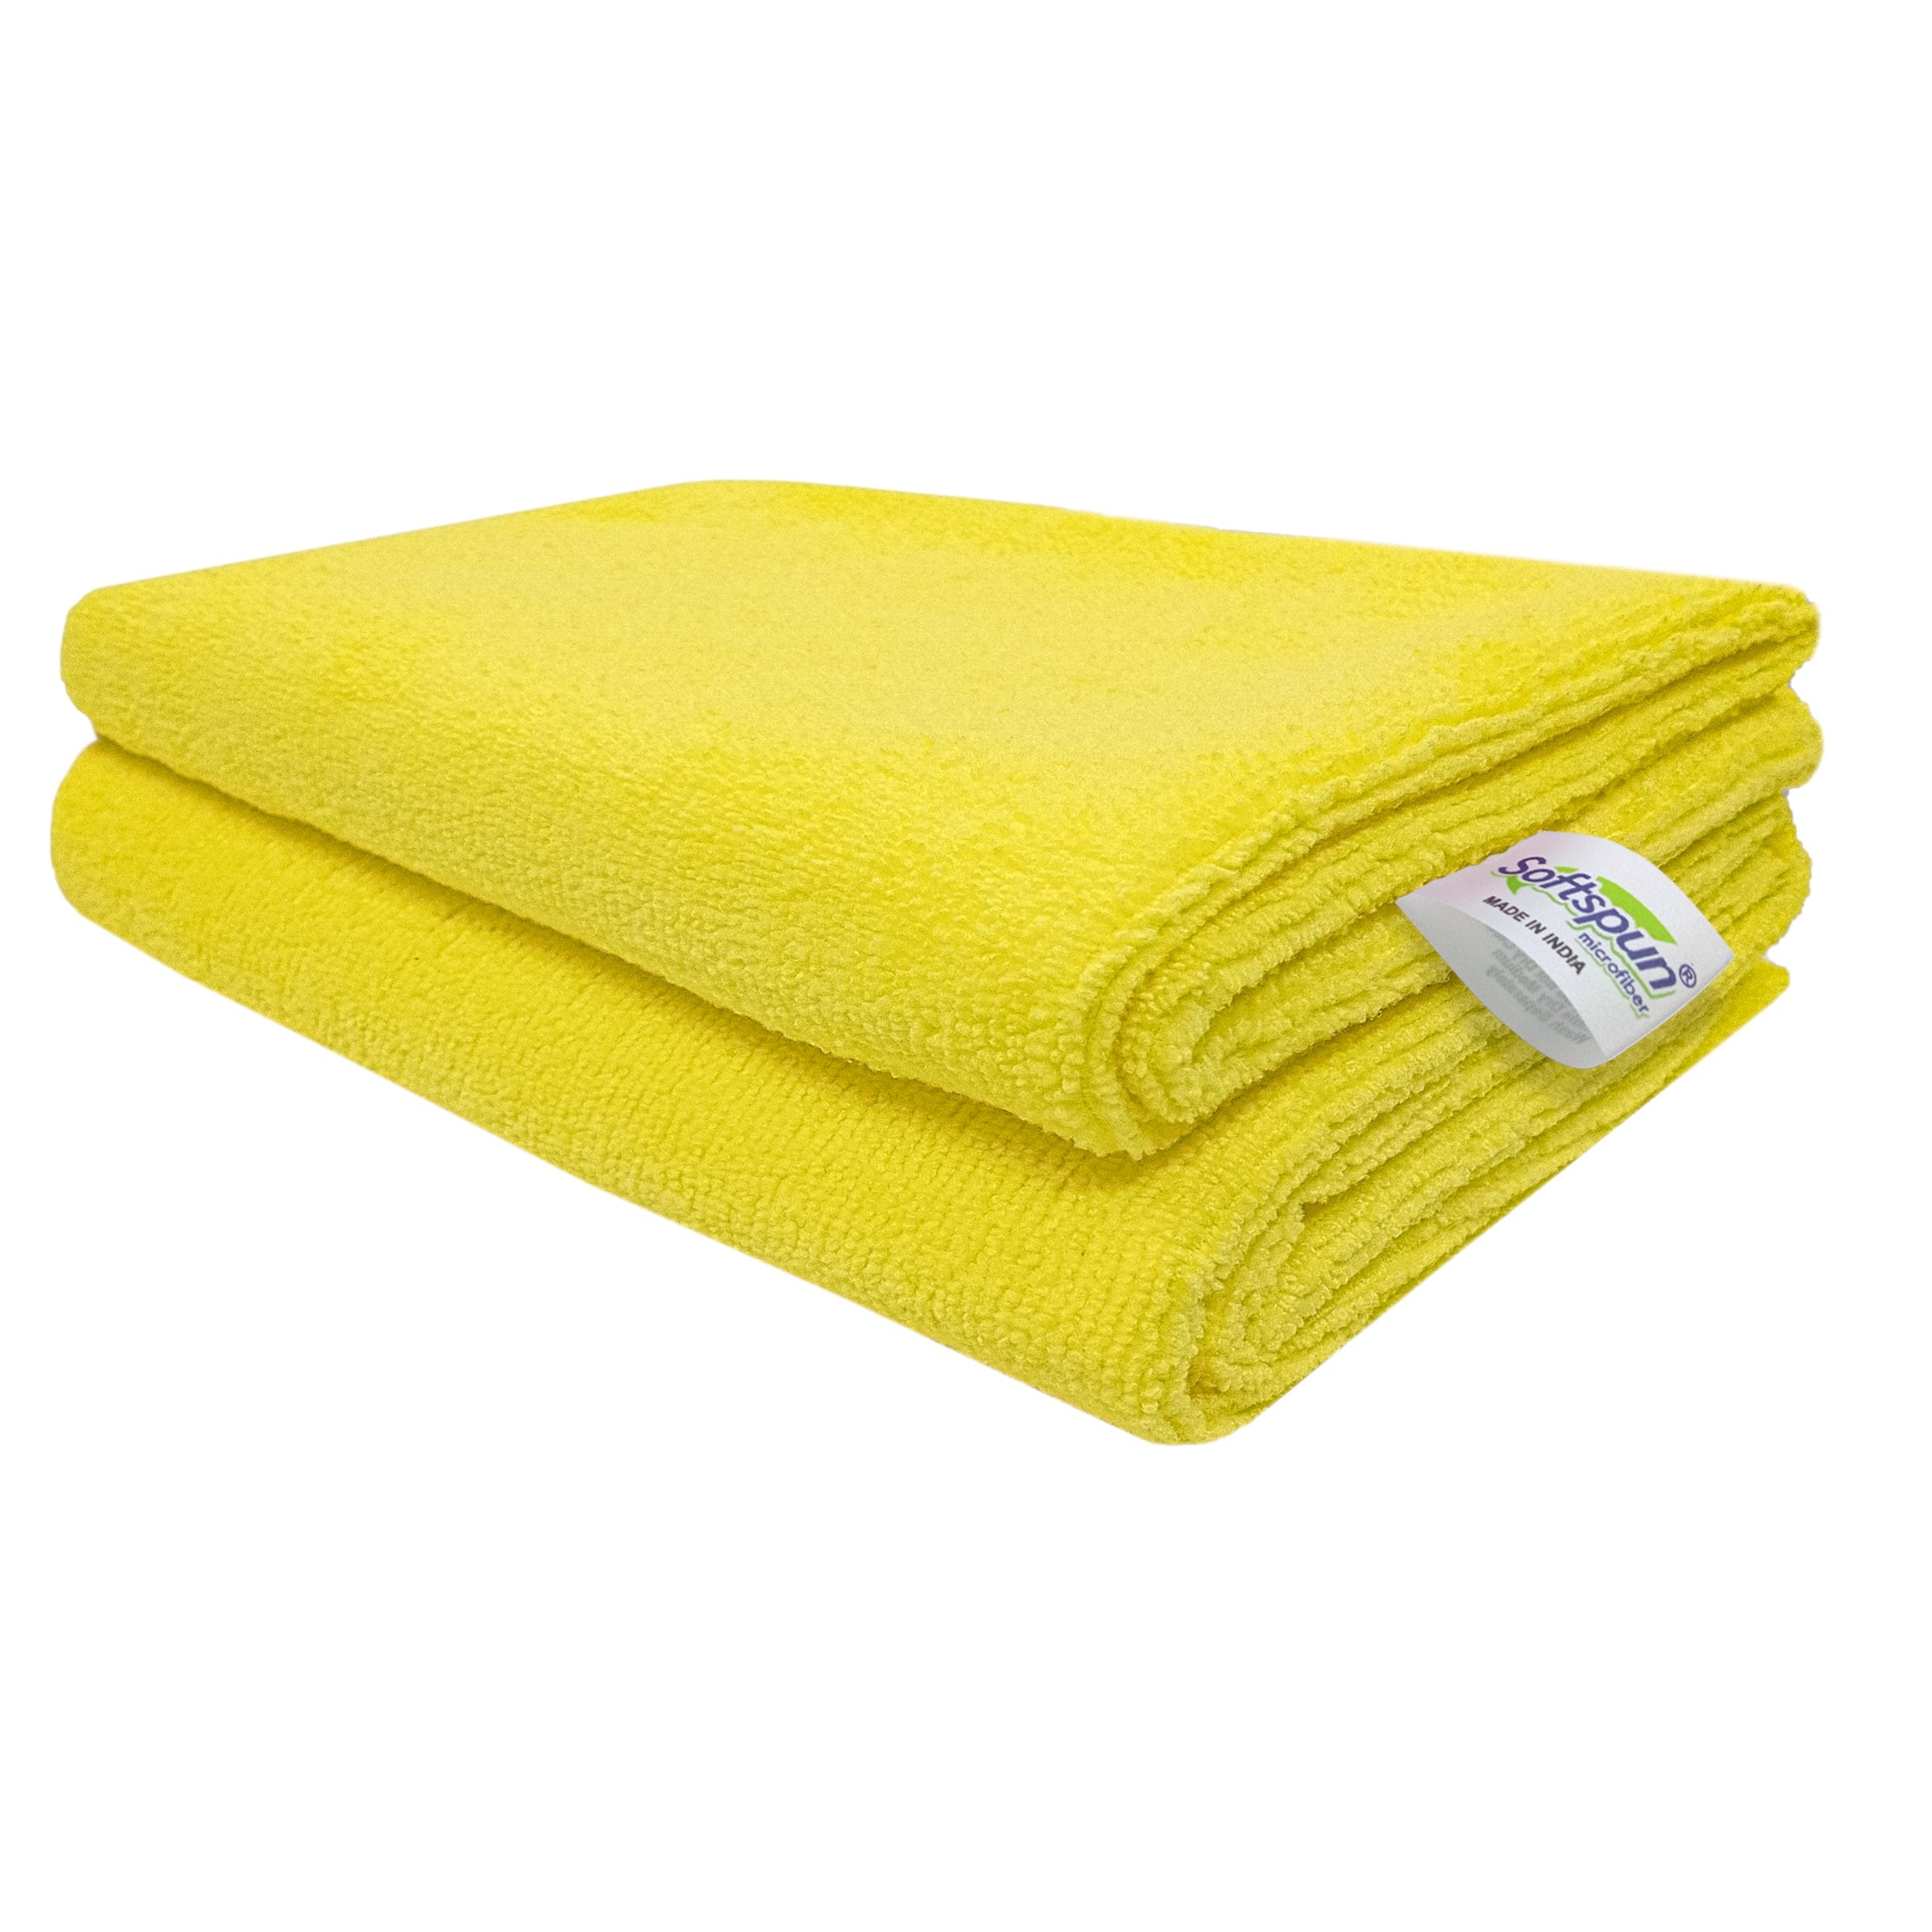 SOFTSPUN Microfiber Face Care Towel, 340 GSM. Super Soft & Comfortable, Quick Drying, Ultra Absorbent in Large Size.